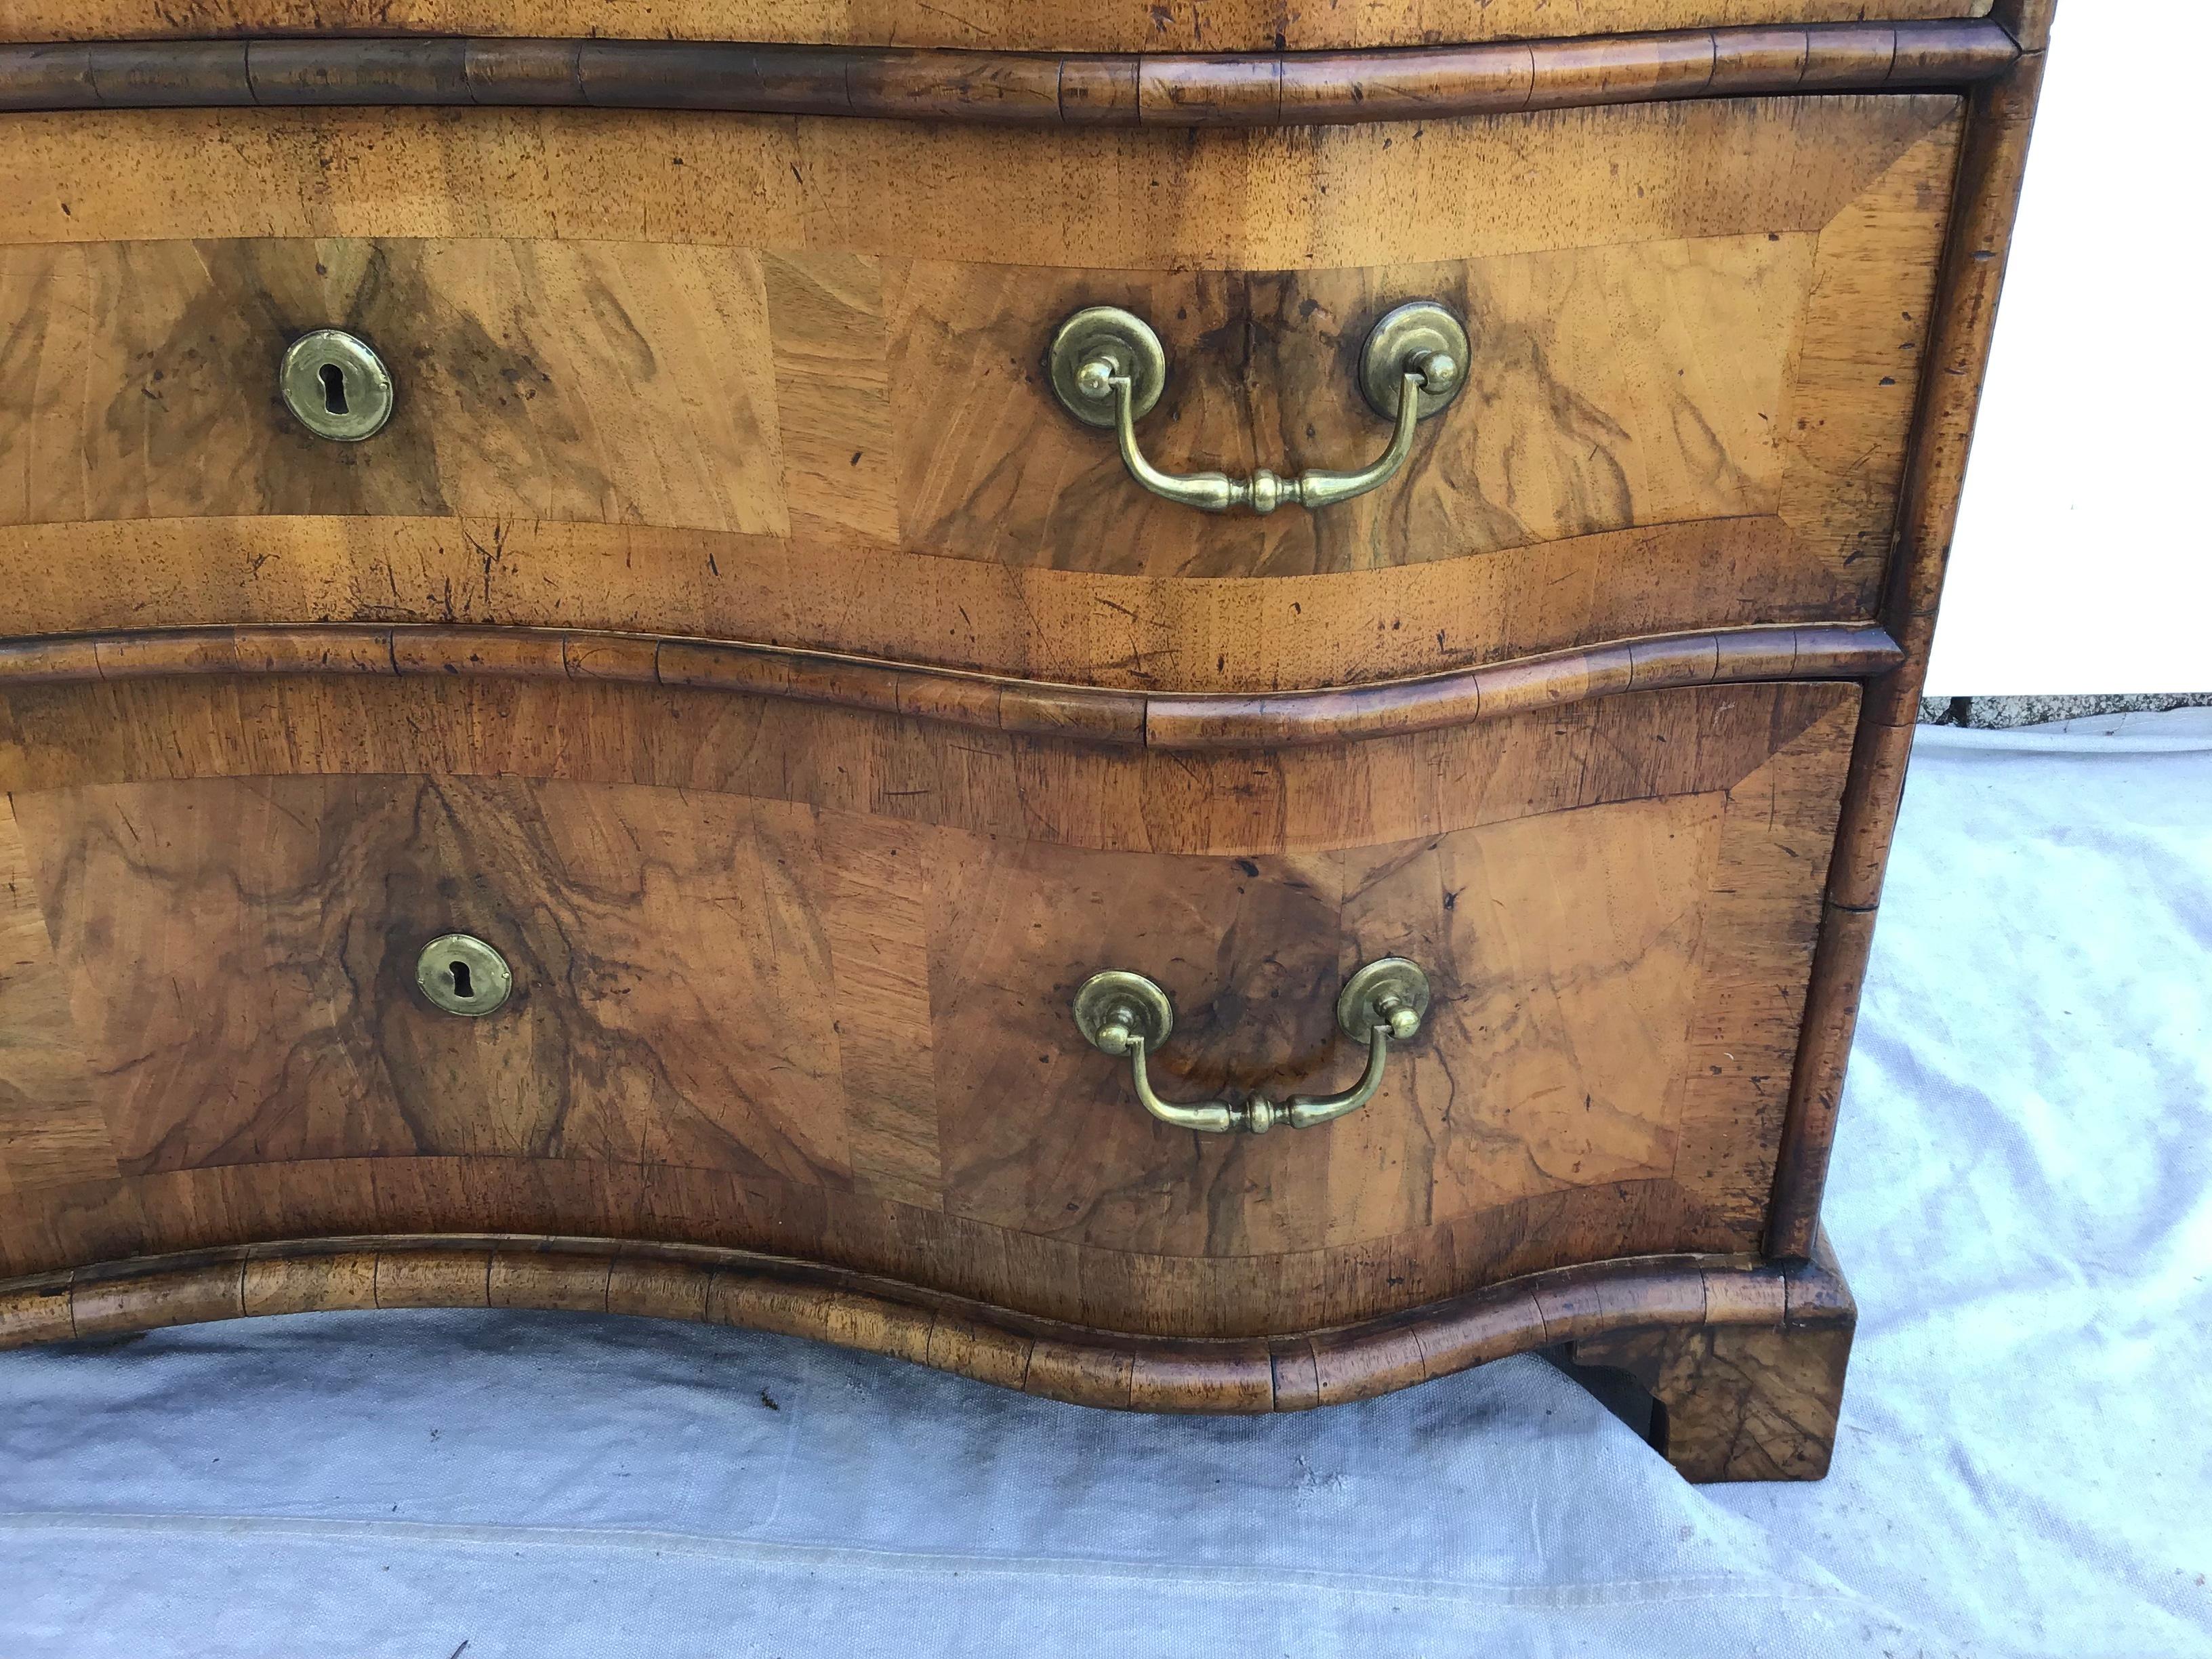 A very fine quality 3-drawer Baroque German commode in walnut with inlaid fruitwood Marquetry decoration, the serpentine drawers retaining their original locks and brass drawer pulls and escutcheons, mid-18th century.